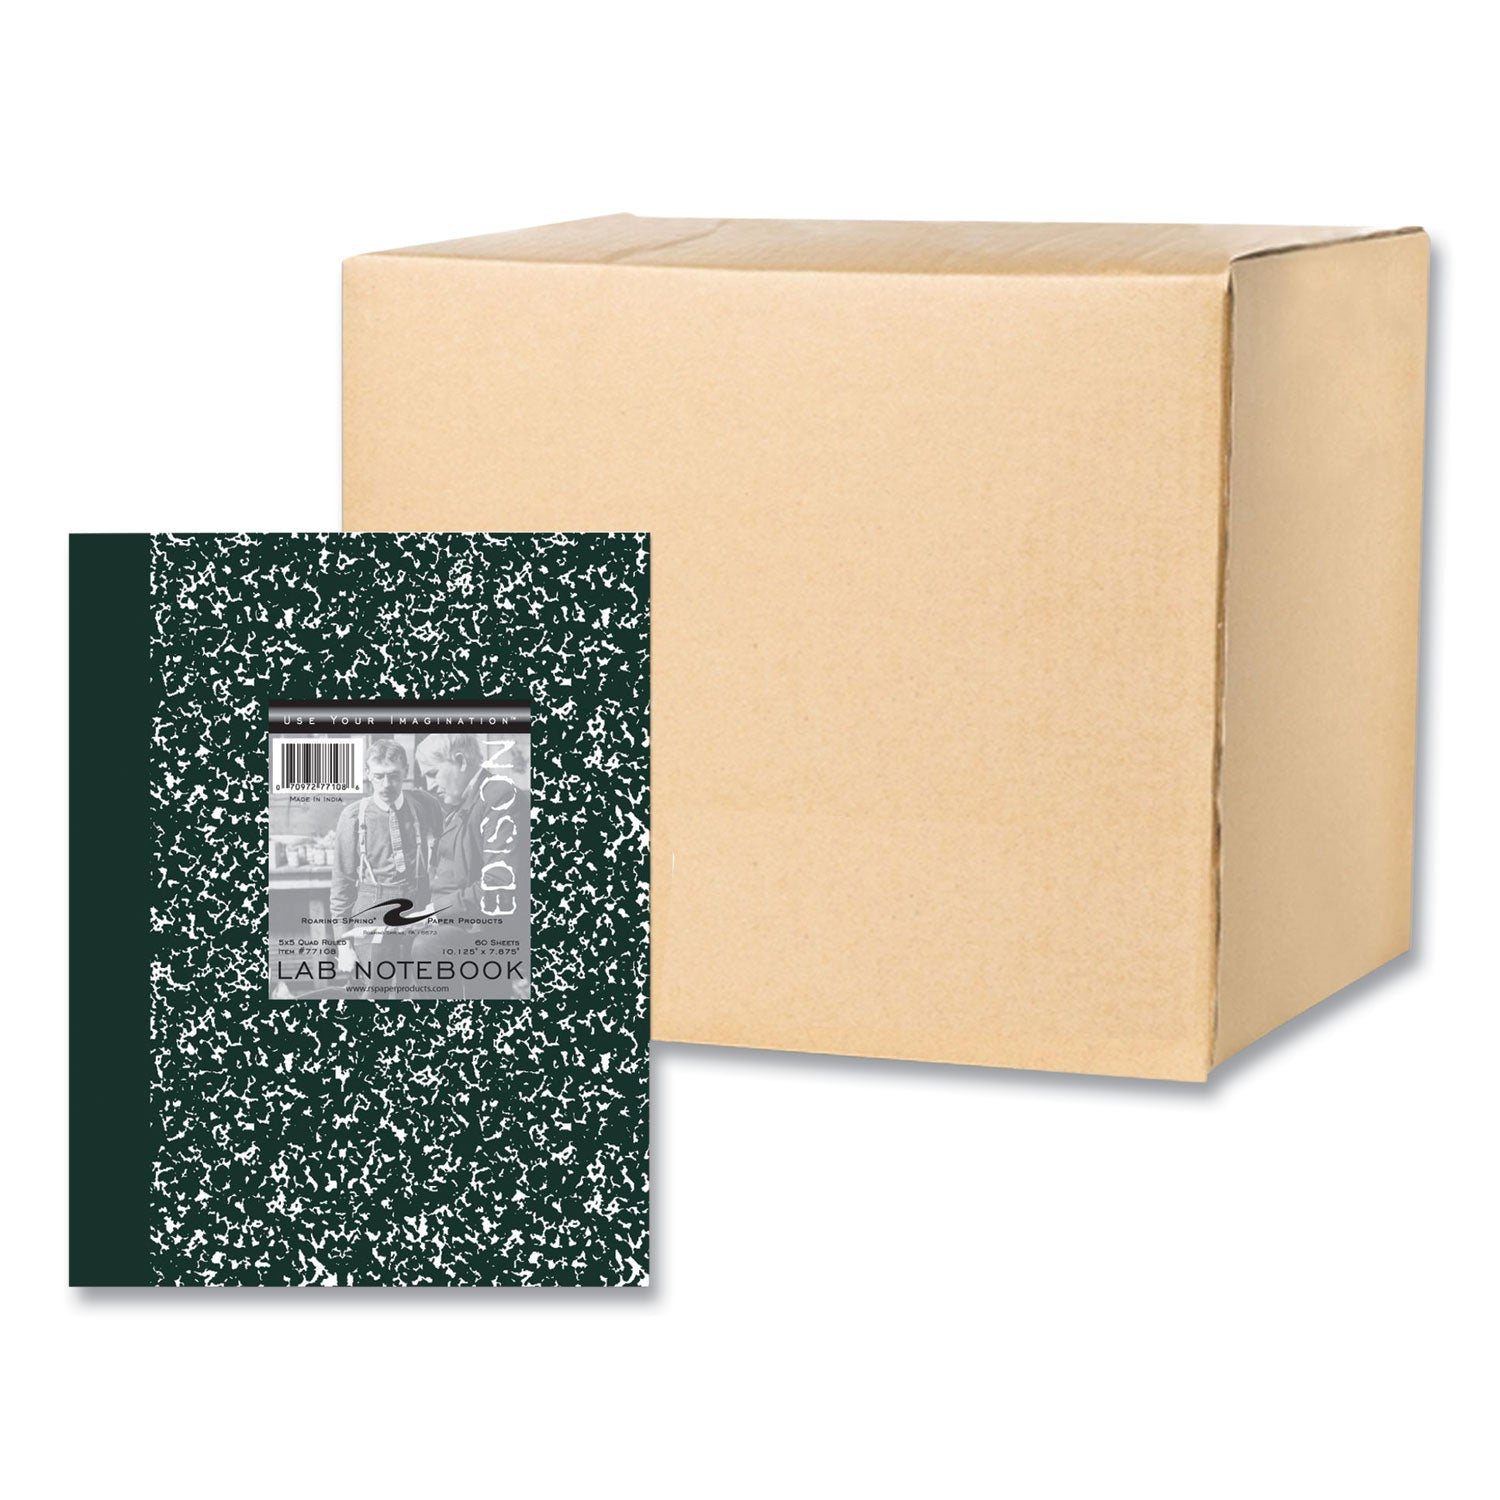 lab-and-science-notebook-quadrille-rule-5-sq-in-green-marble-cover-60-1013-x-788-sheets-24-ctships-in-4-6-bus-days_roa77108cs - 5